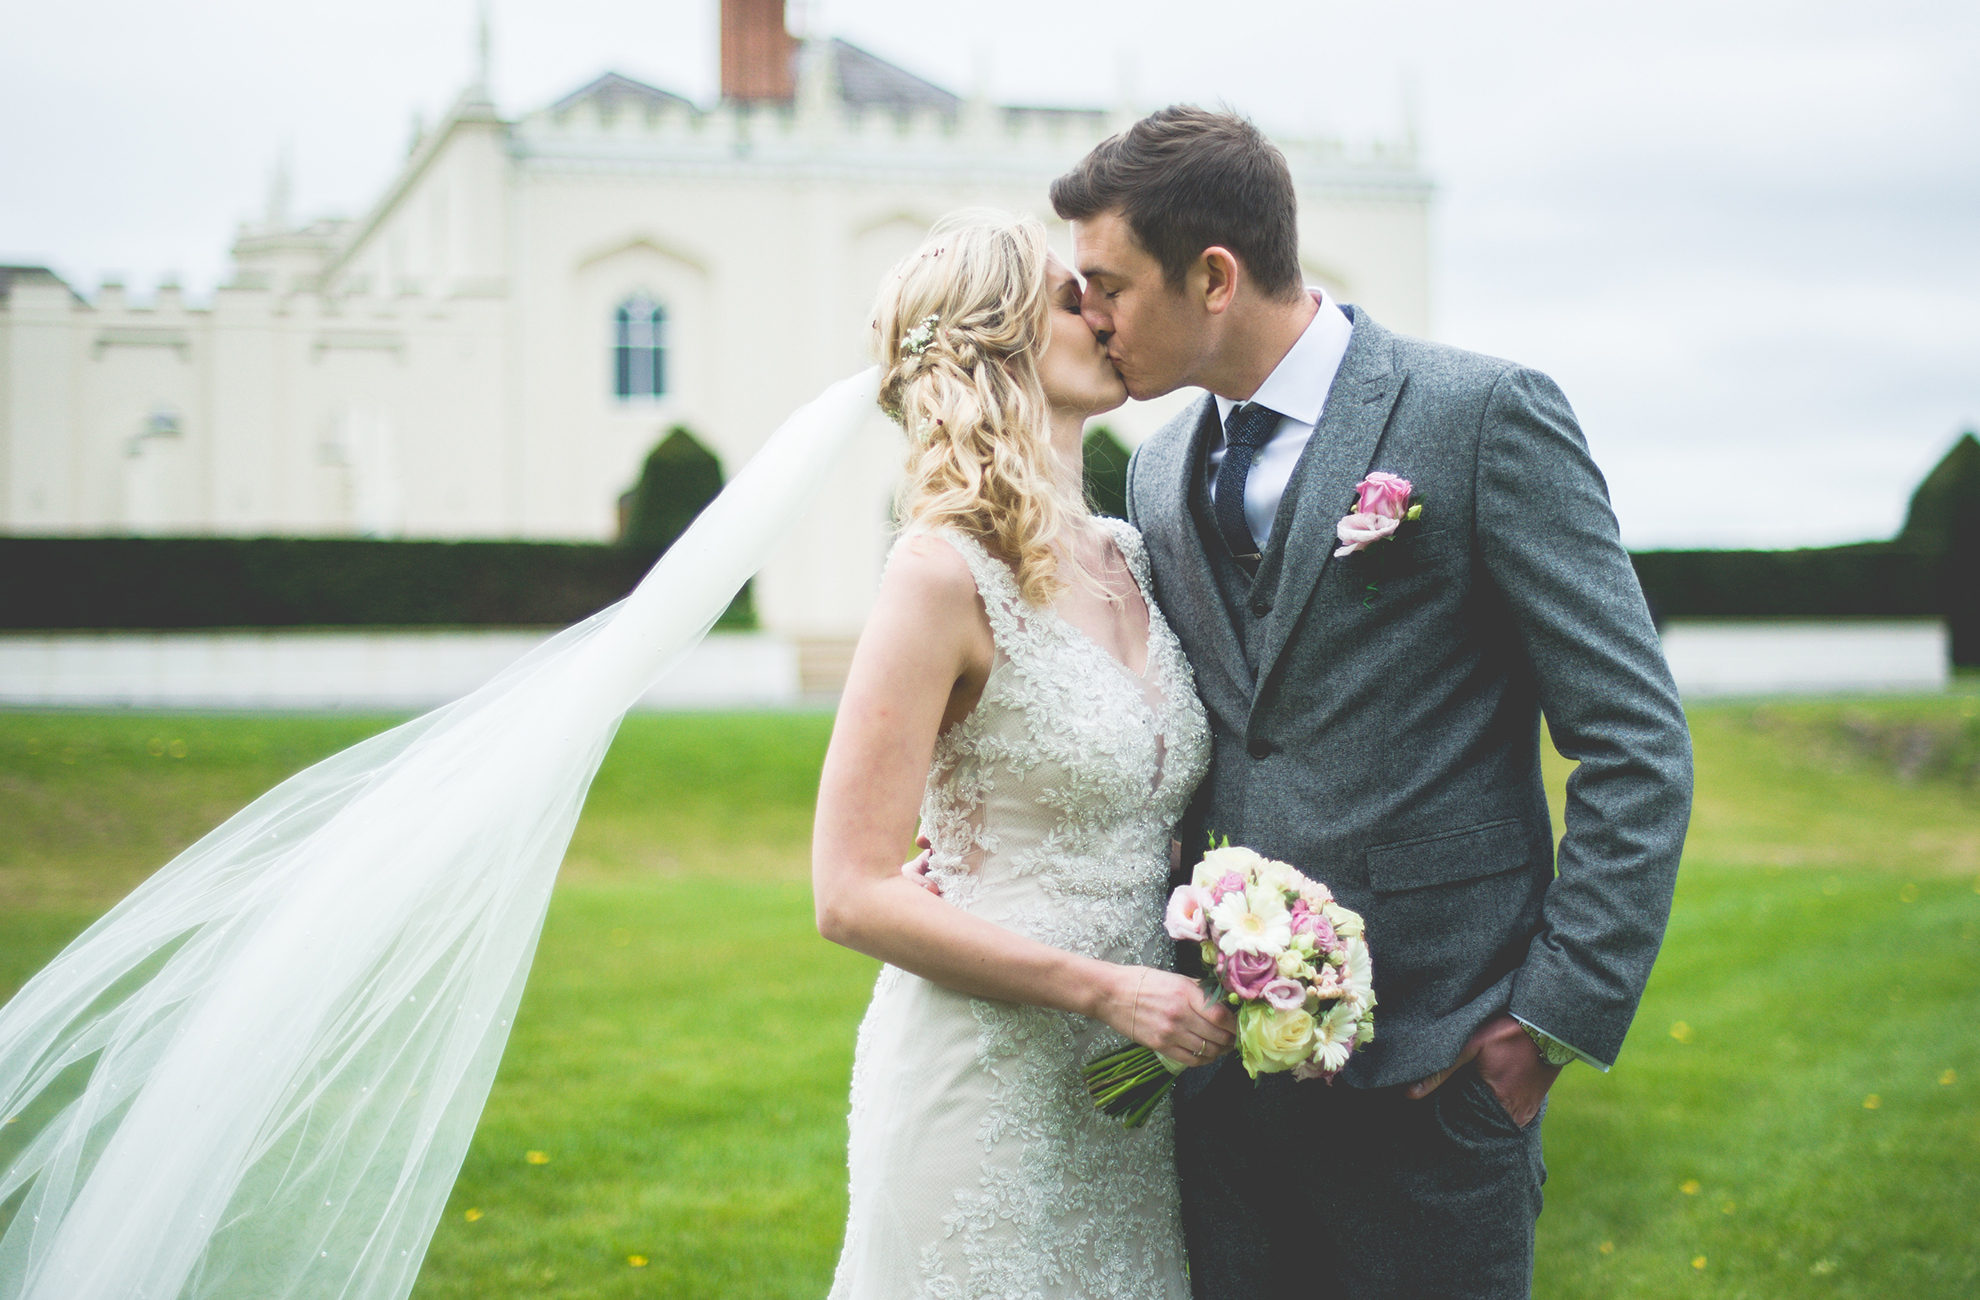 The happy couple steal a moment away from the wedding party and kiss in front of the North Wing – spring wedding